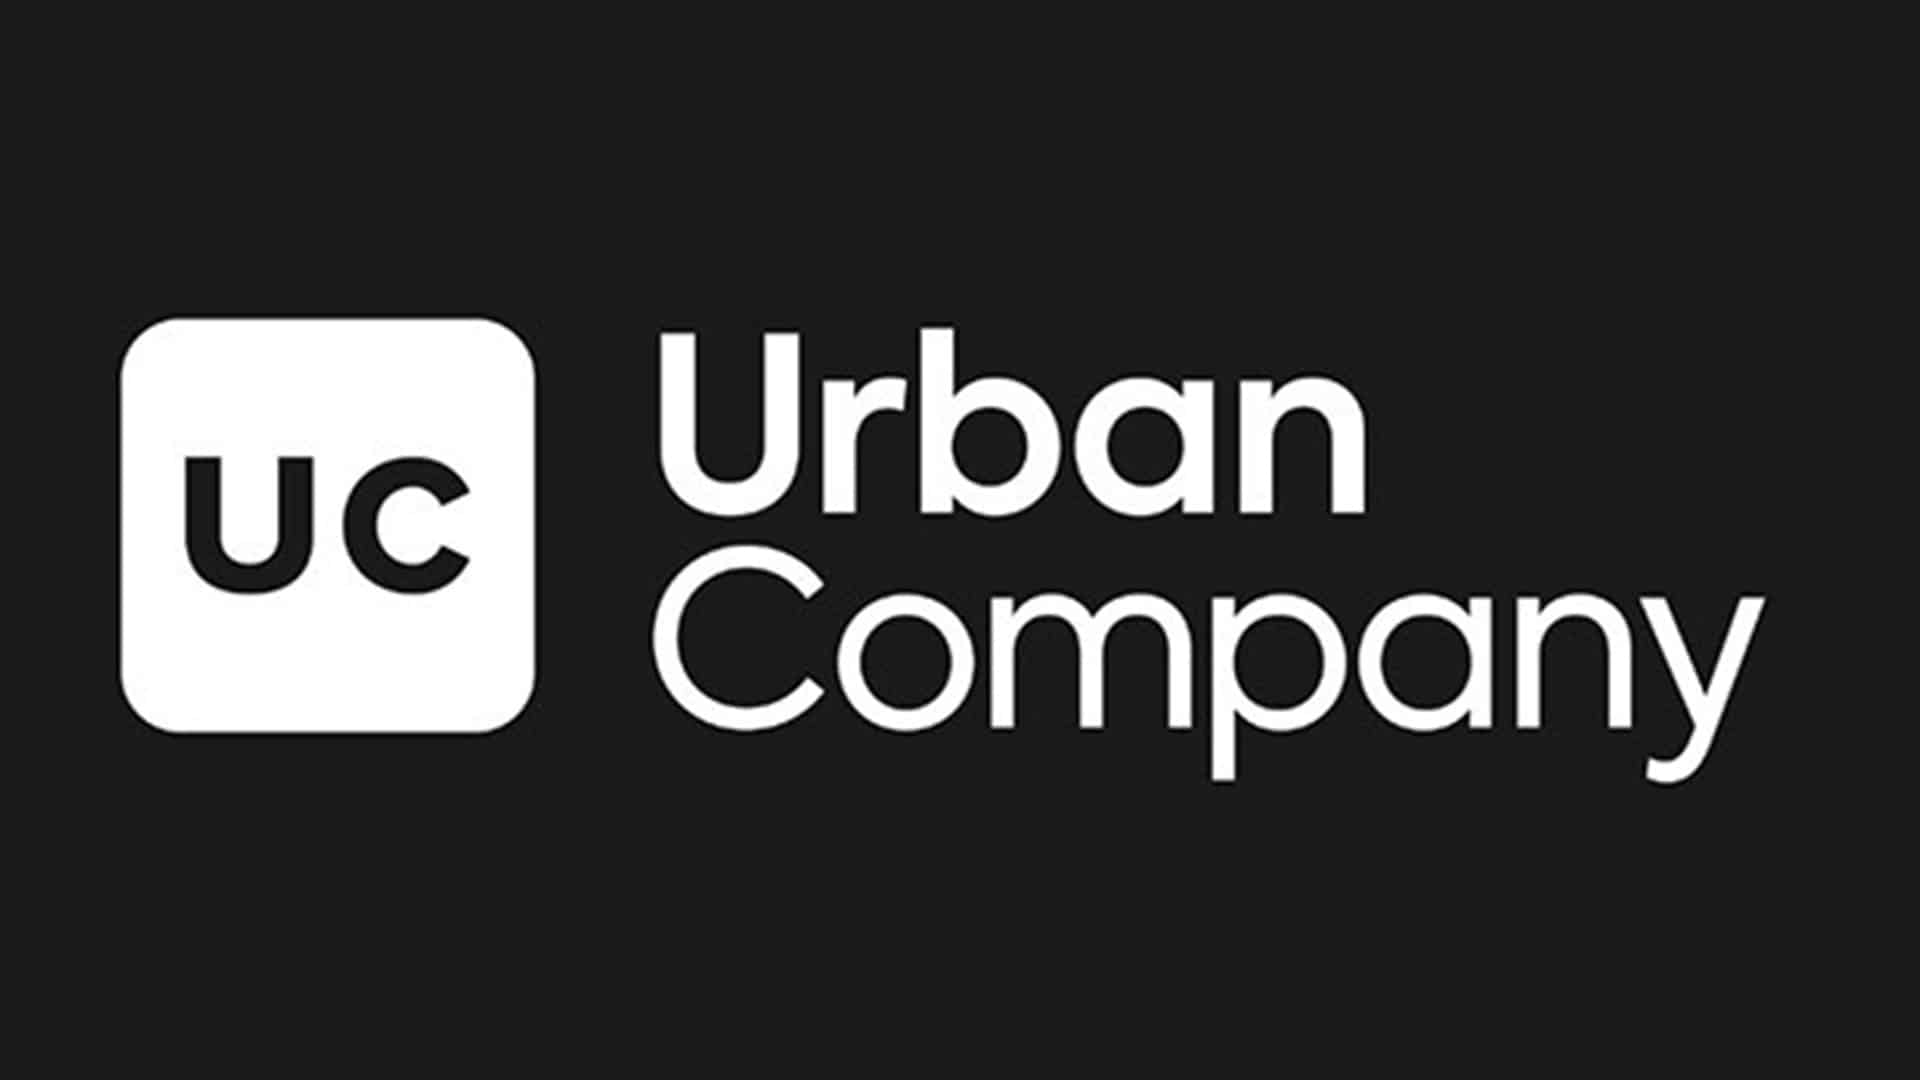 Urban Company valuation rises to USD 2.8 bn in 4th ESOP sale